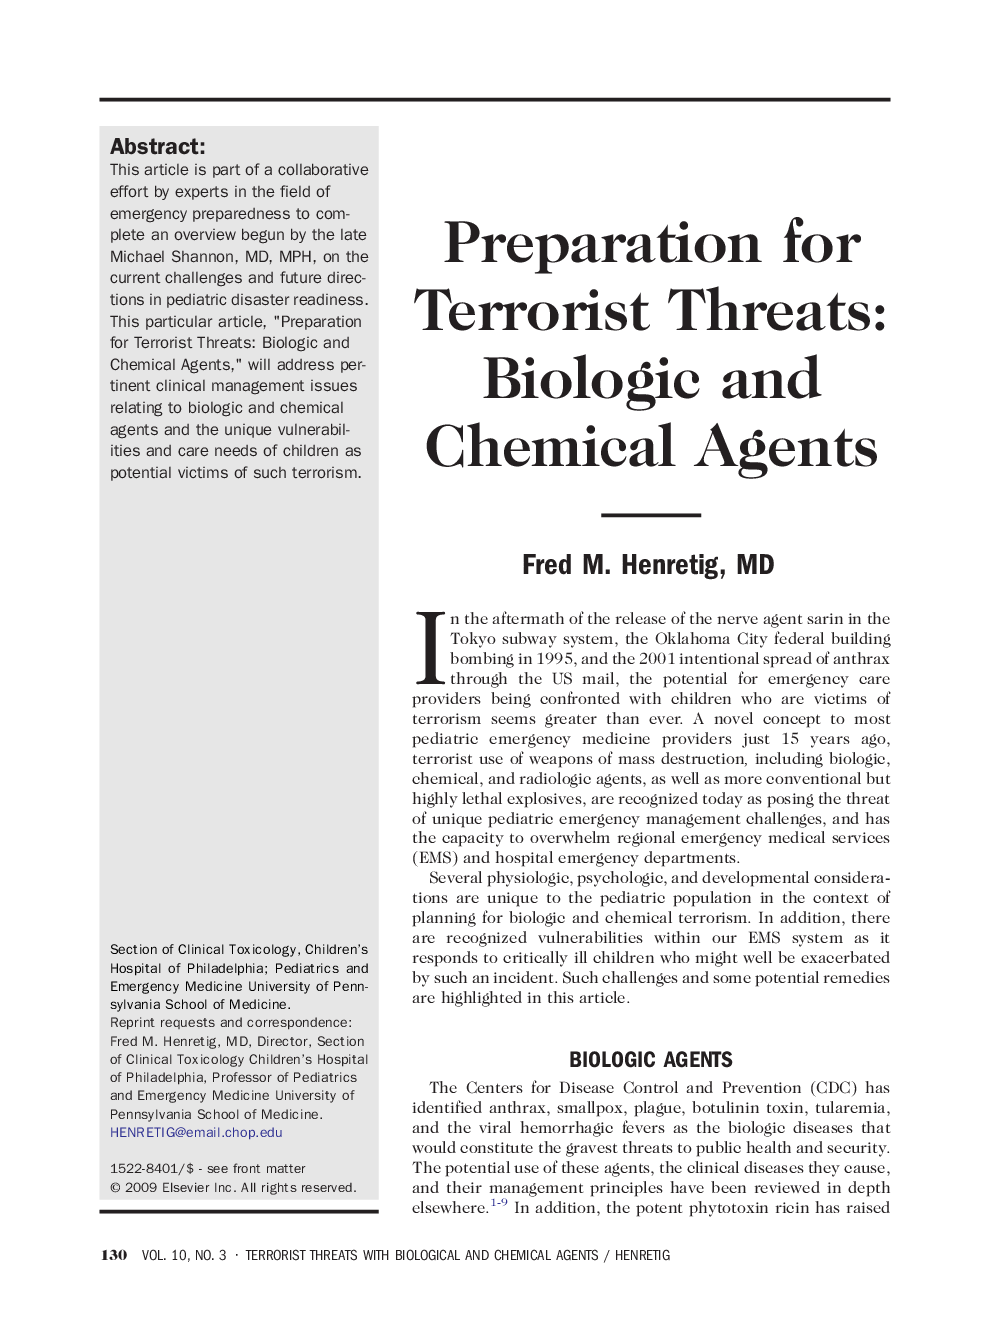 Preparation for Terrorist Threats: Biologic and Chemical Agents